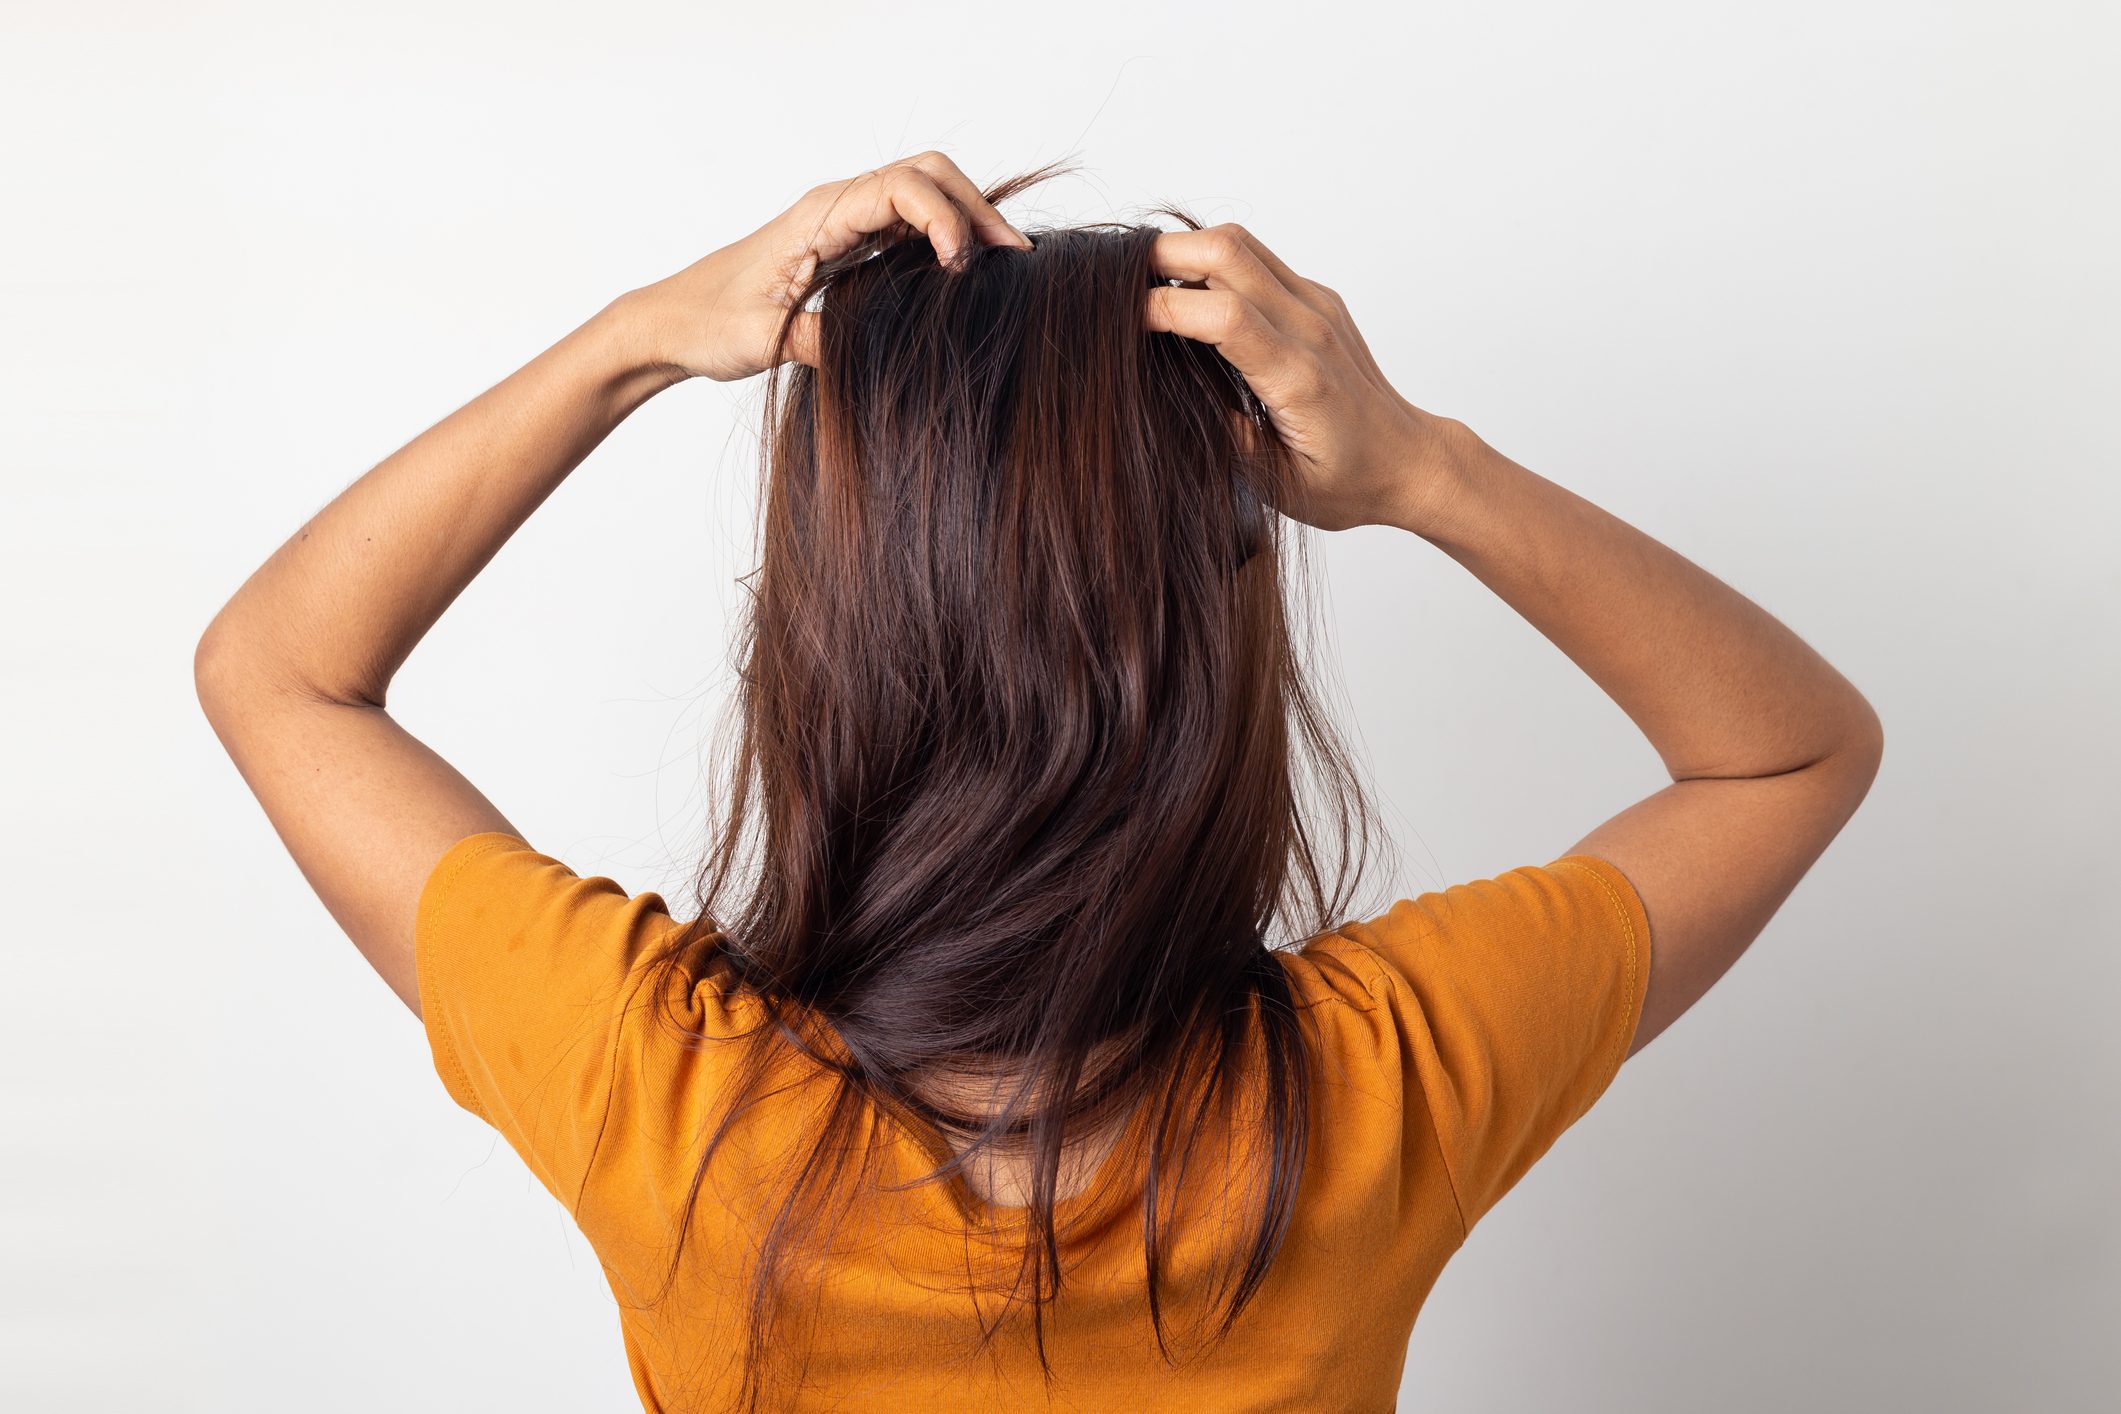 How to Get Rid of Dandruff: 5 Natural Treatments